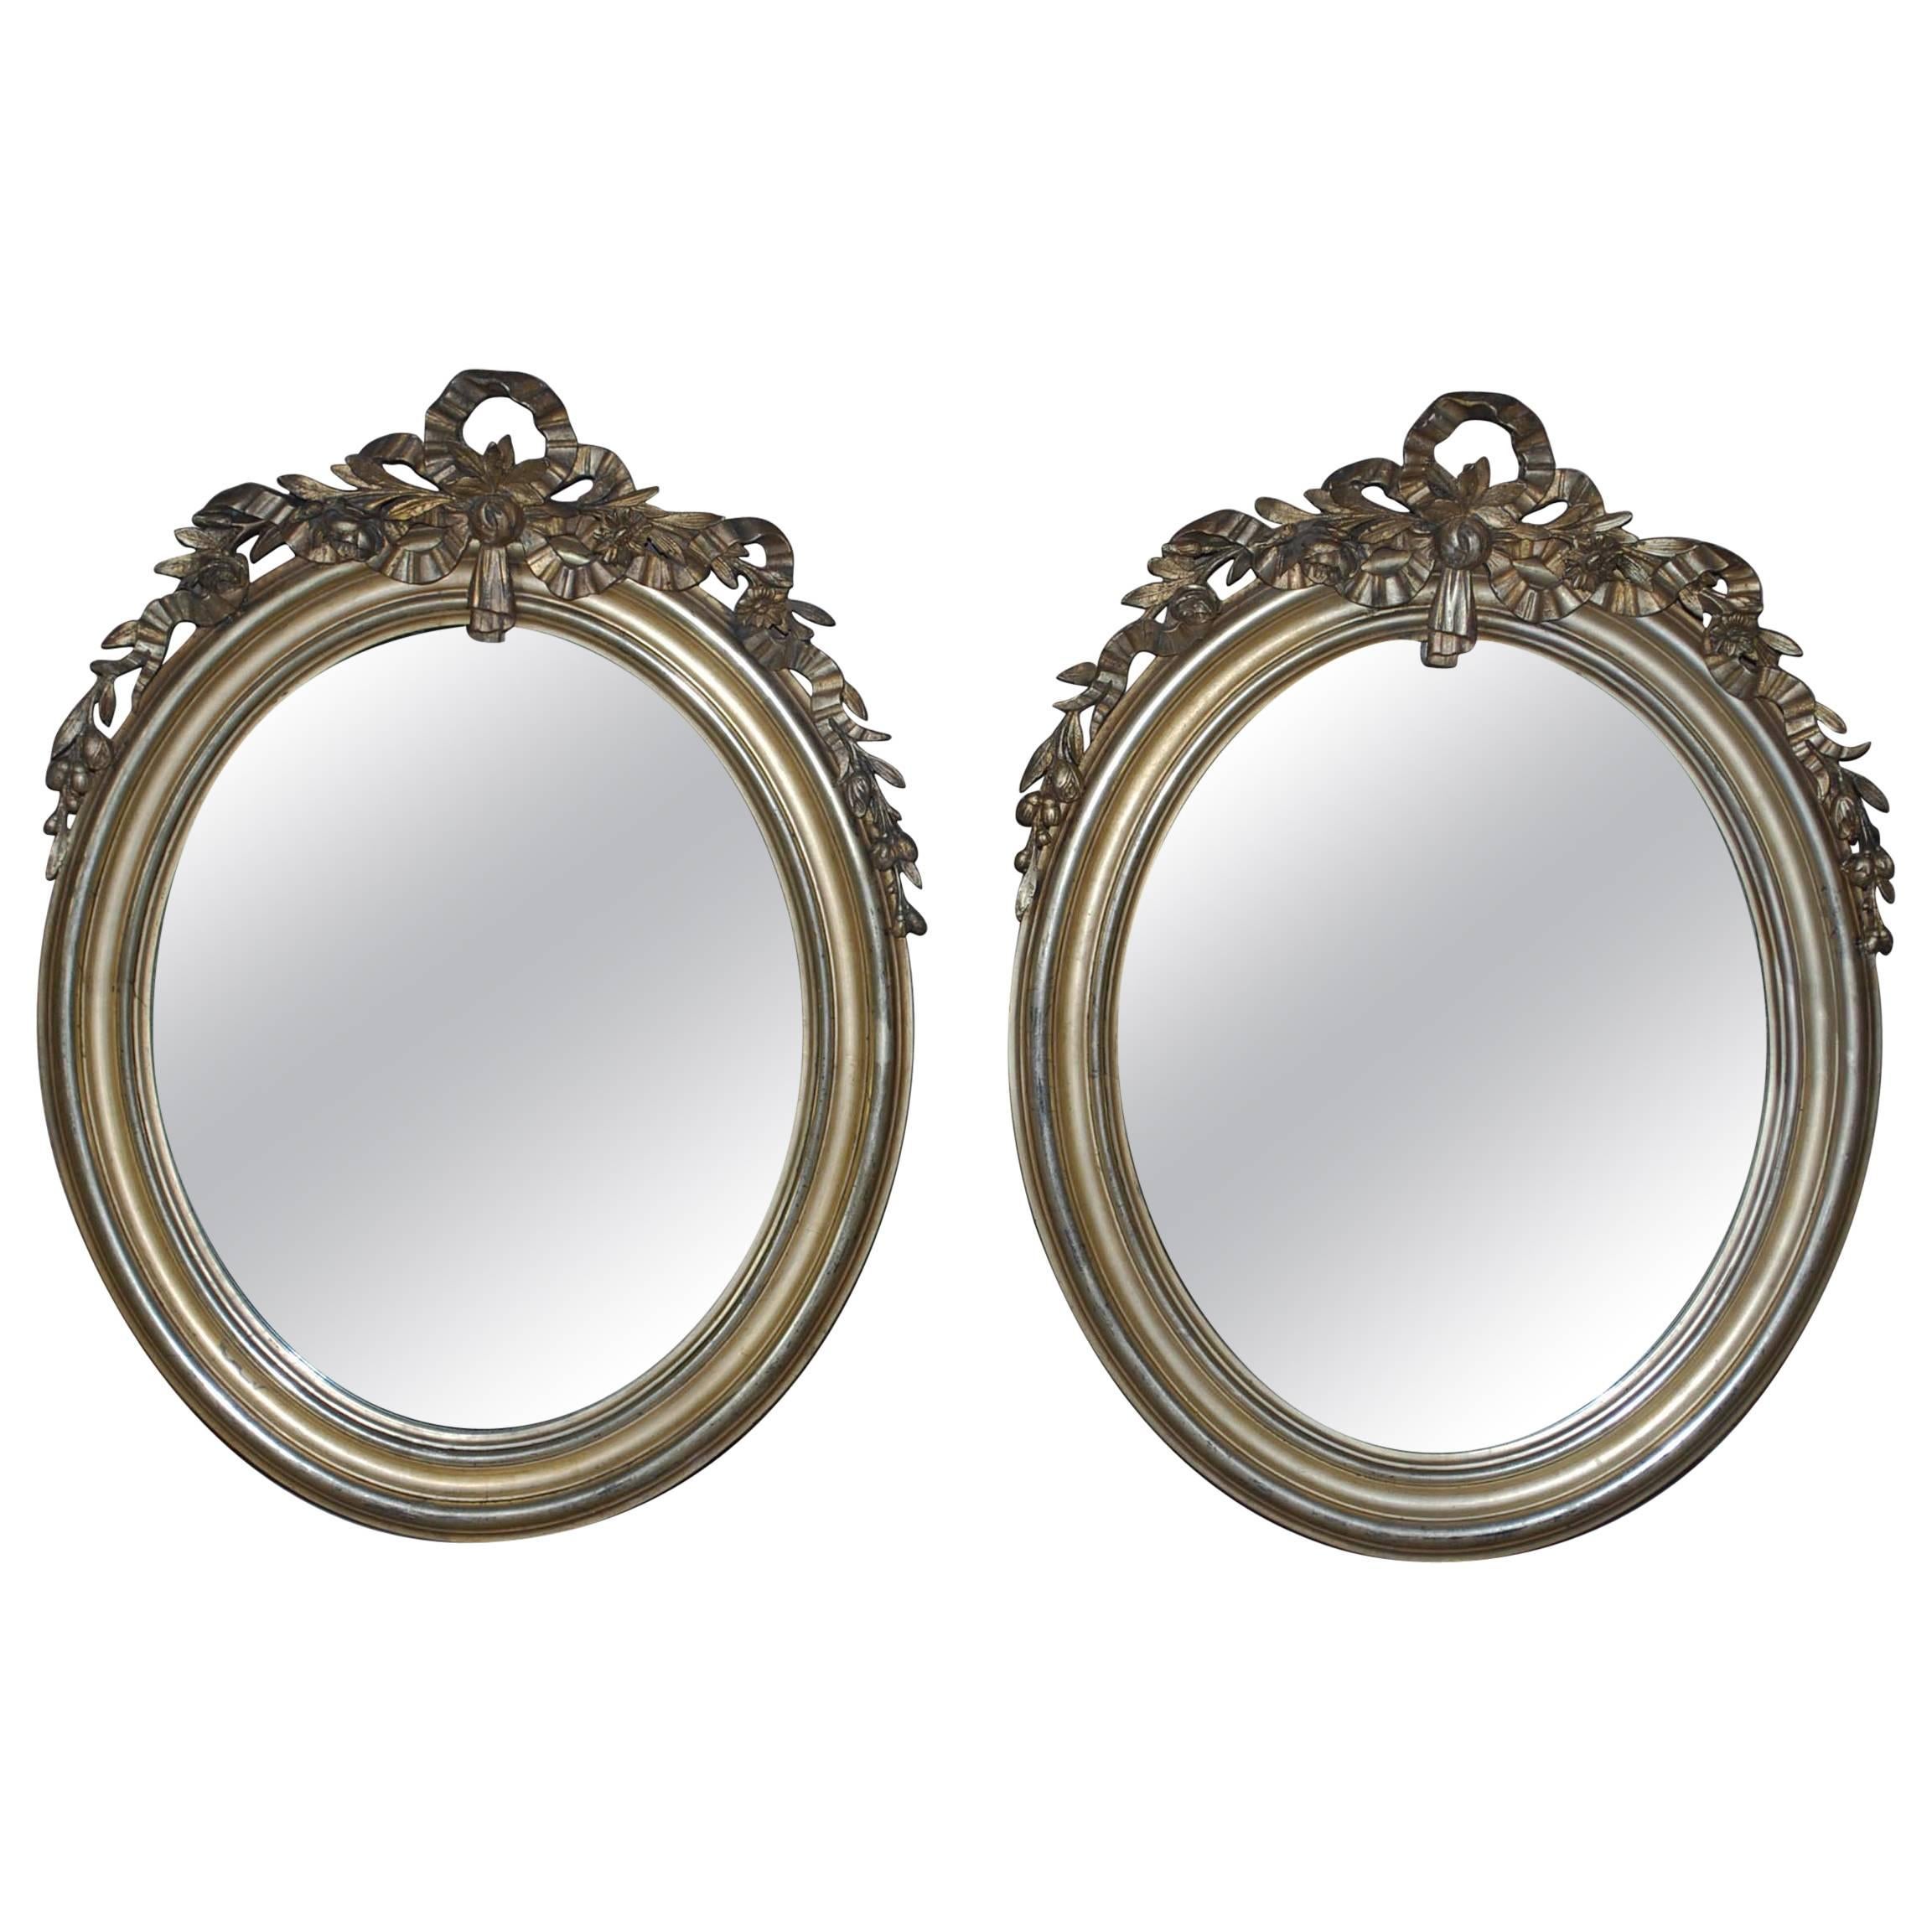 Pair of 19th Century Silver Gilded Oval Mirrors